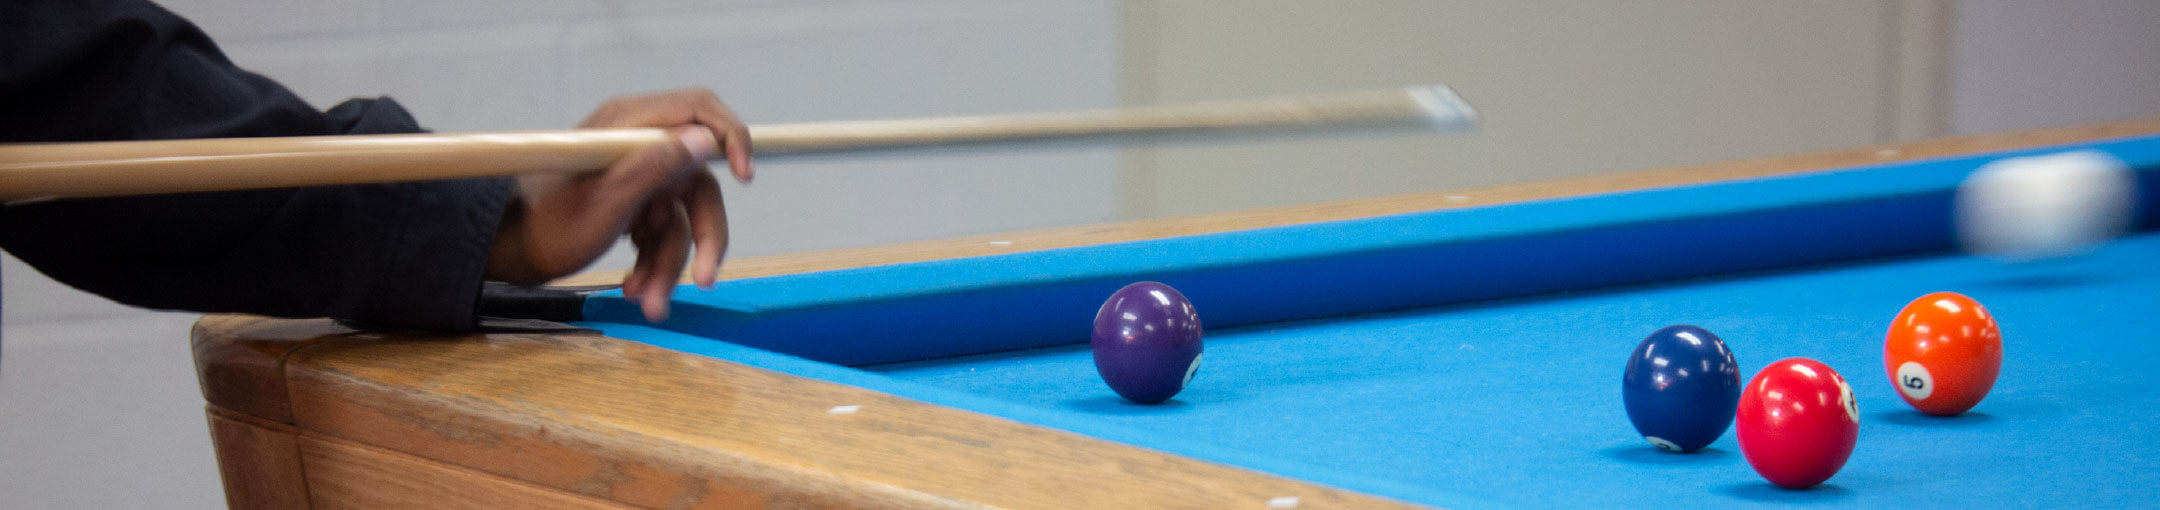 A student's hand playing billiards on a blue pool table.